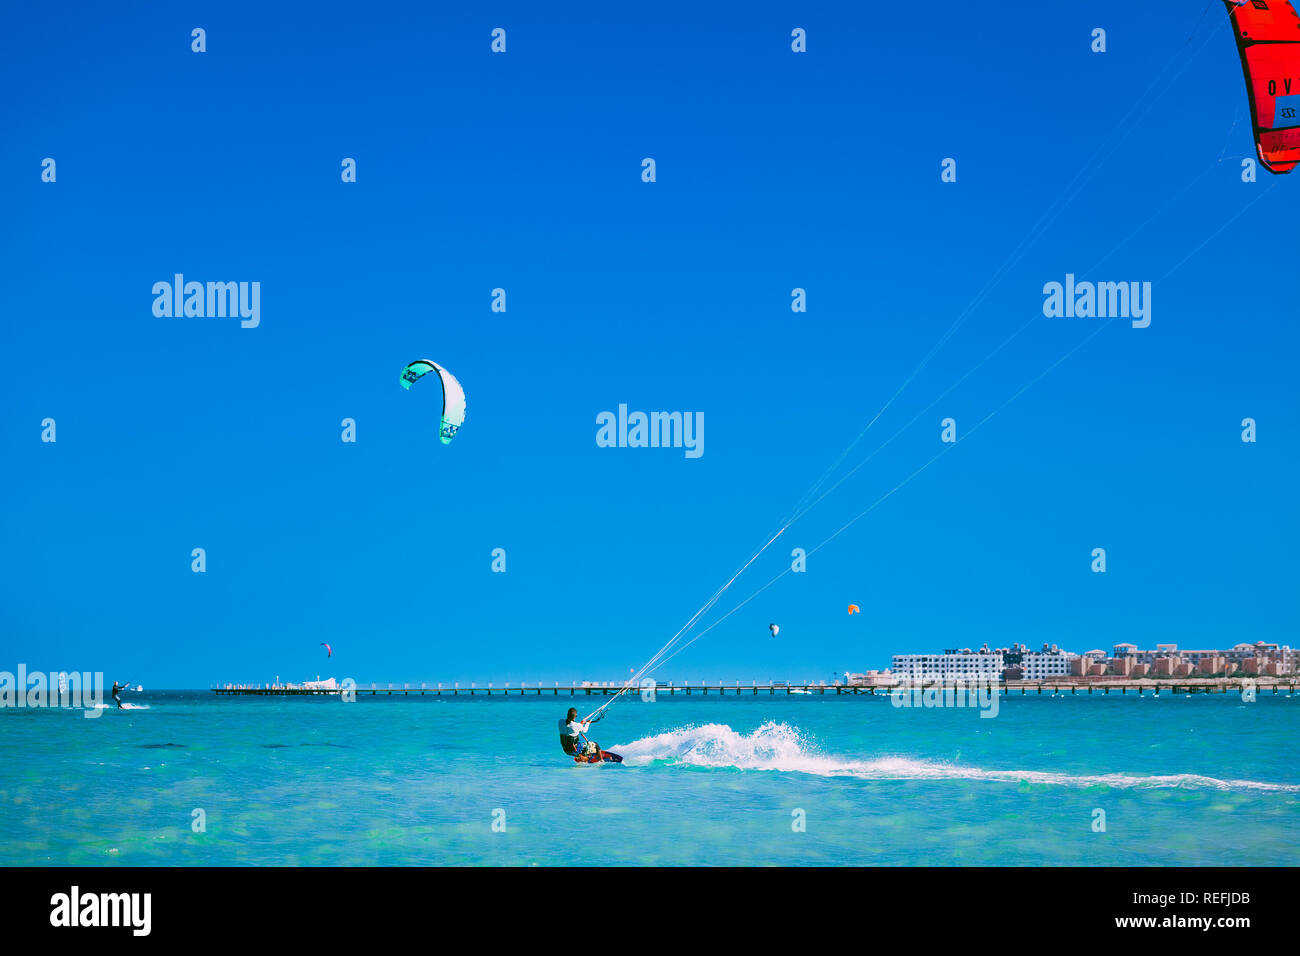 Egypt, Hurghada - 30 November, 2017: The kiters gliding over the Red sea surface. The popular professional and tourist attraction. The Panorama Bungal Stock Photo